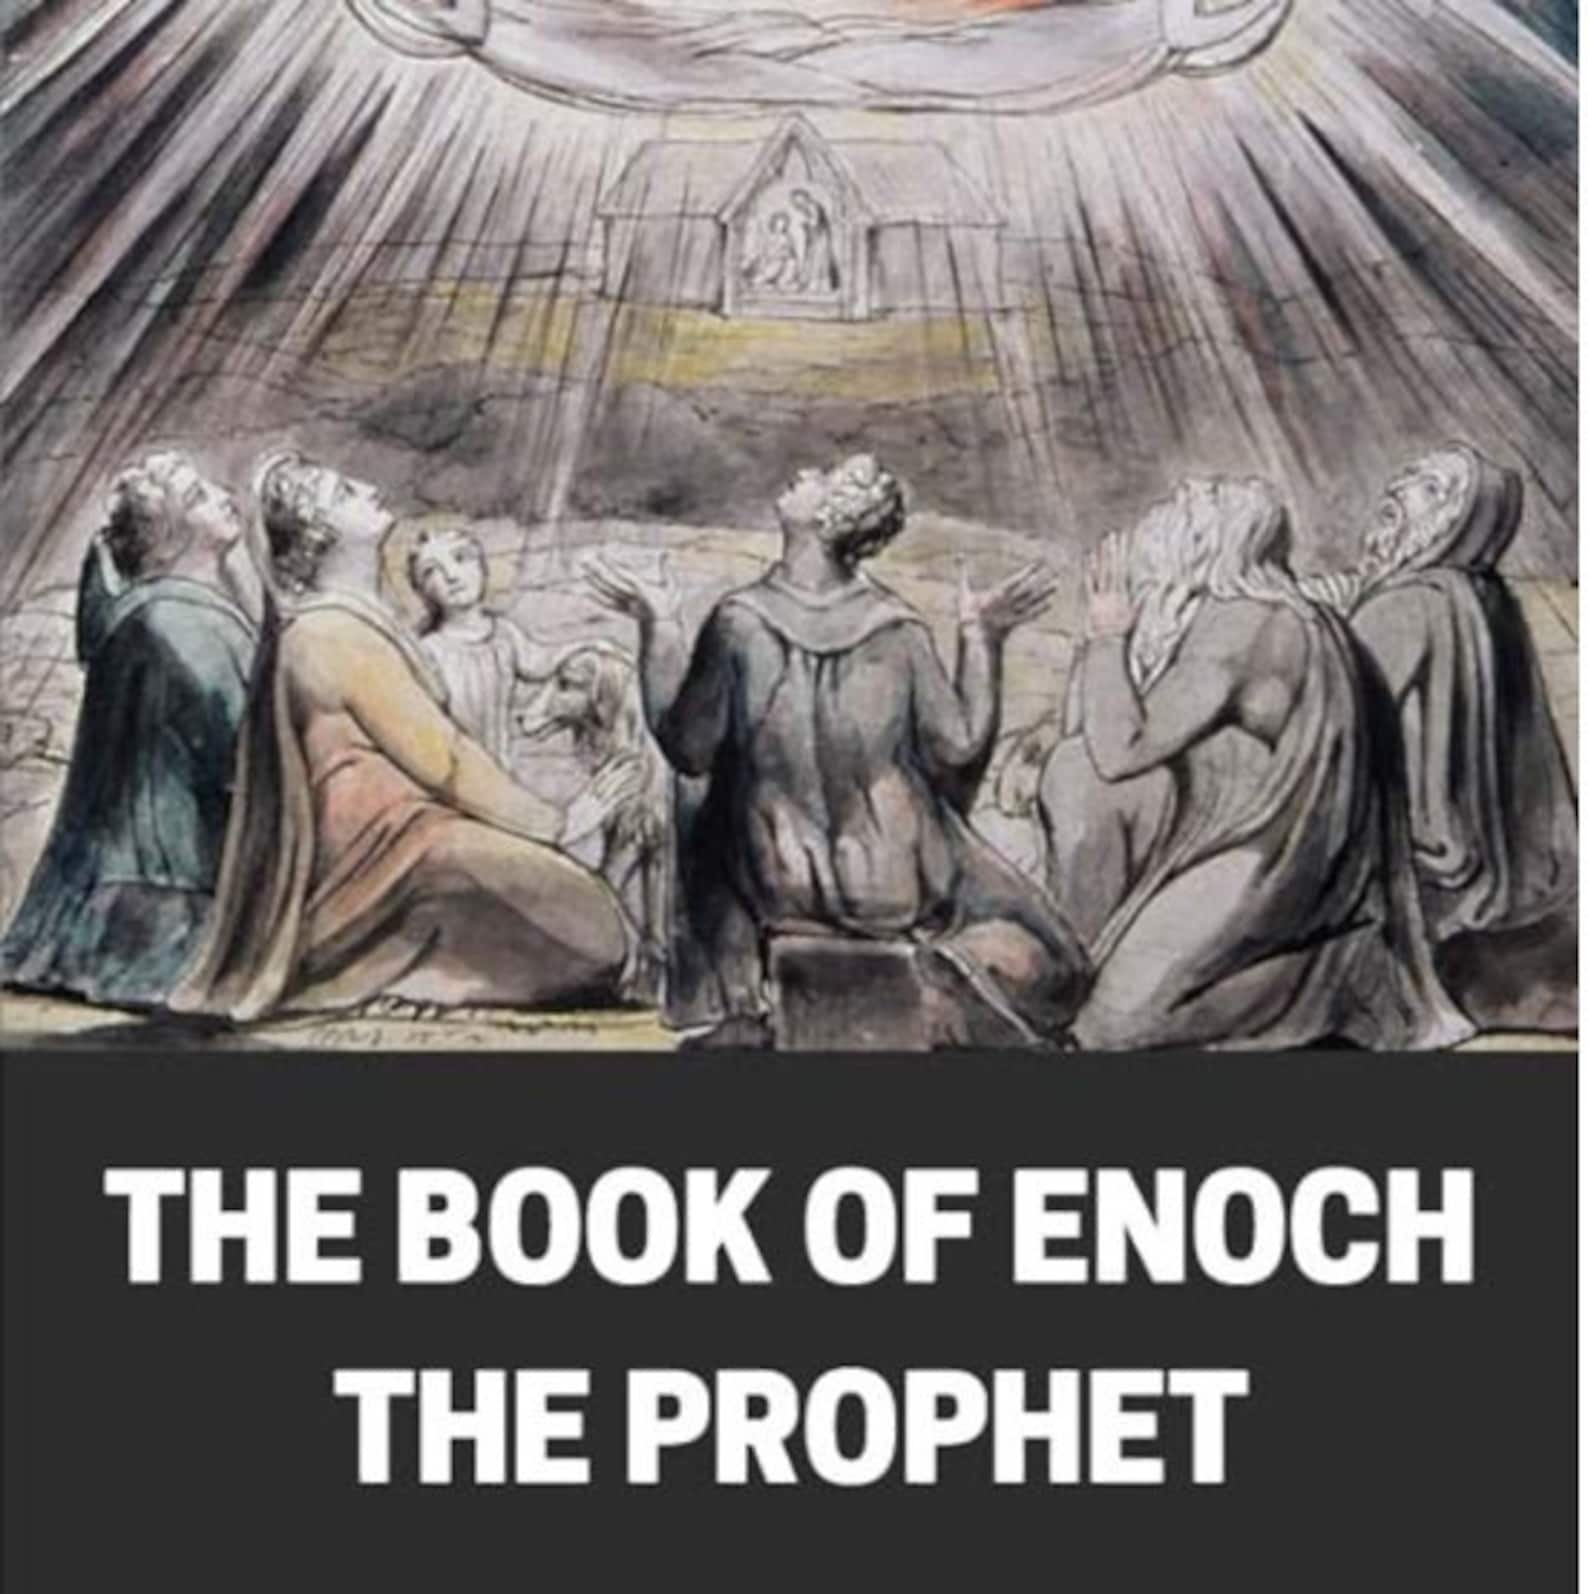 The Book of ENOCH THE PROPHET Apocrypha Christianity Etsy